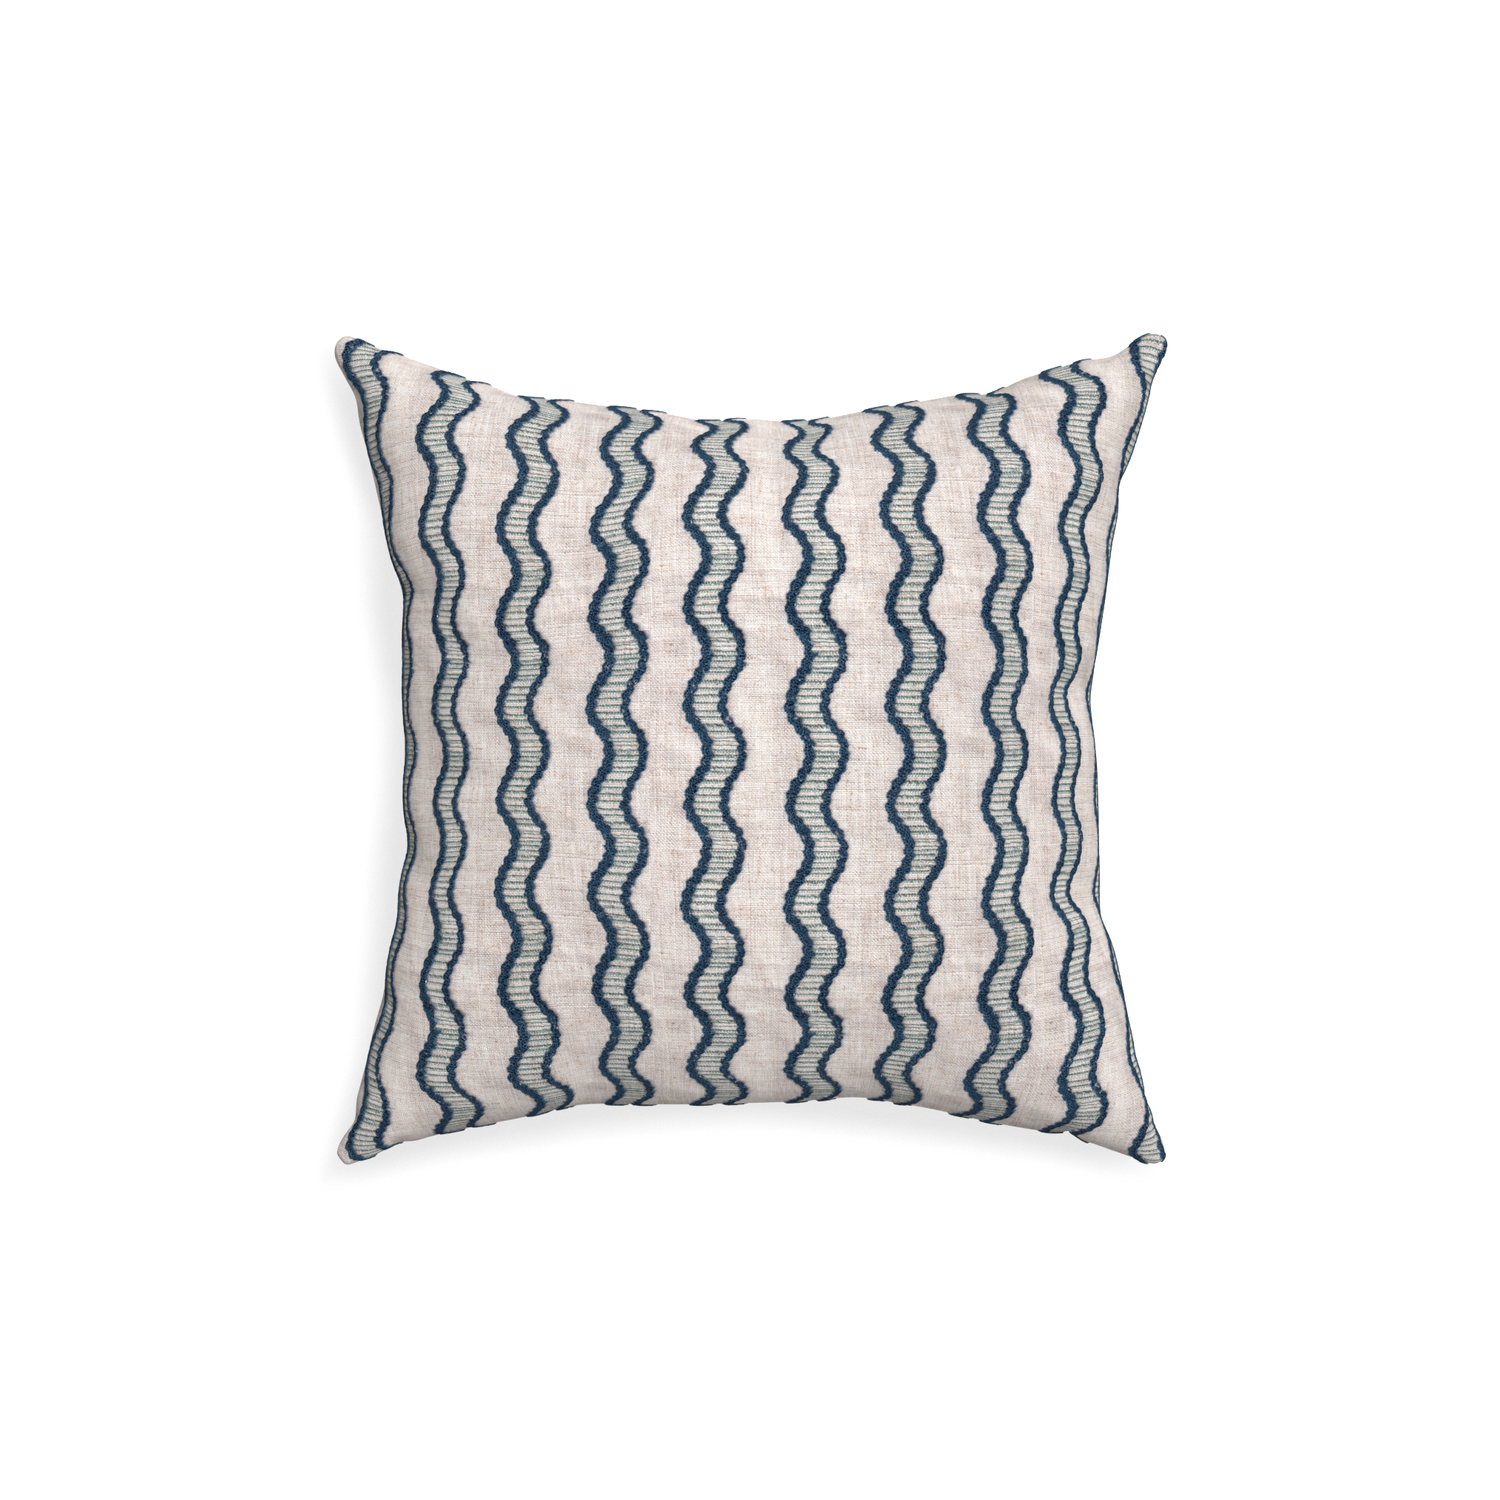 18-square beatrice custom embroidered wavepillow with none on white background